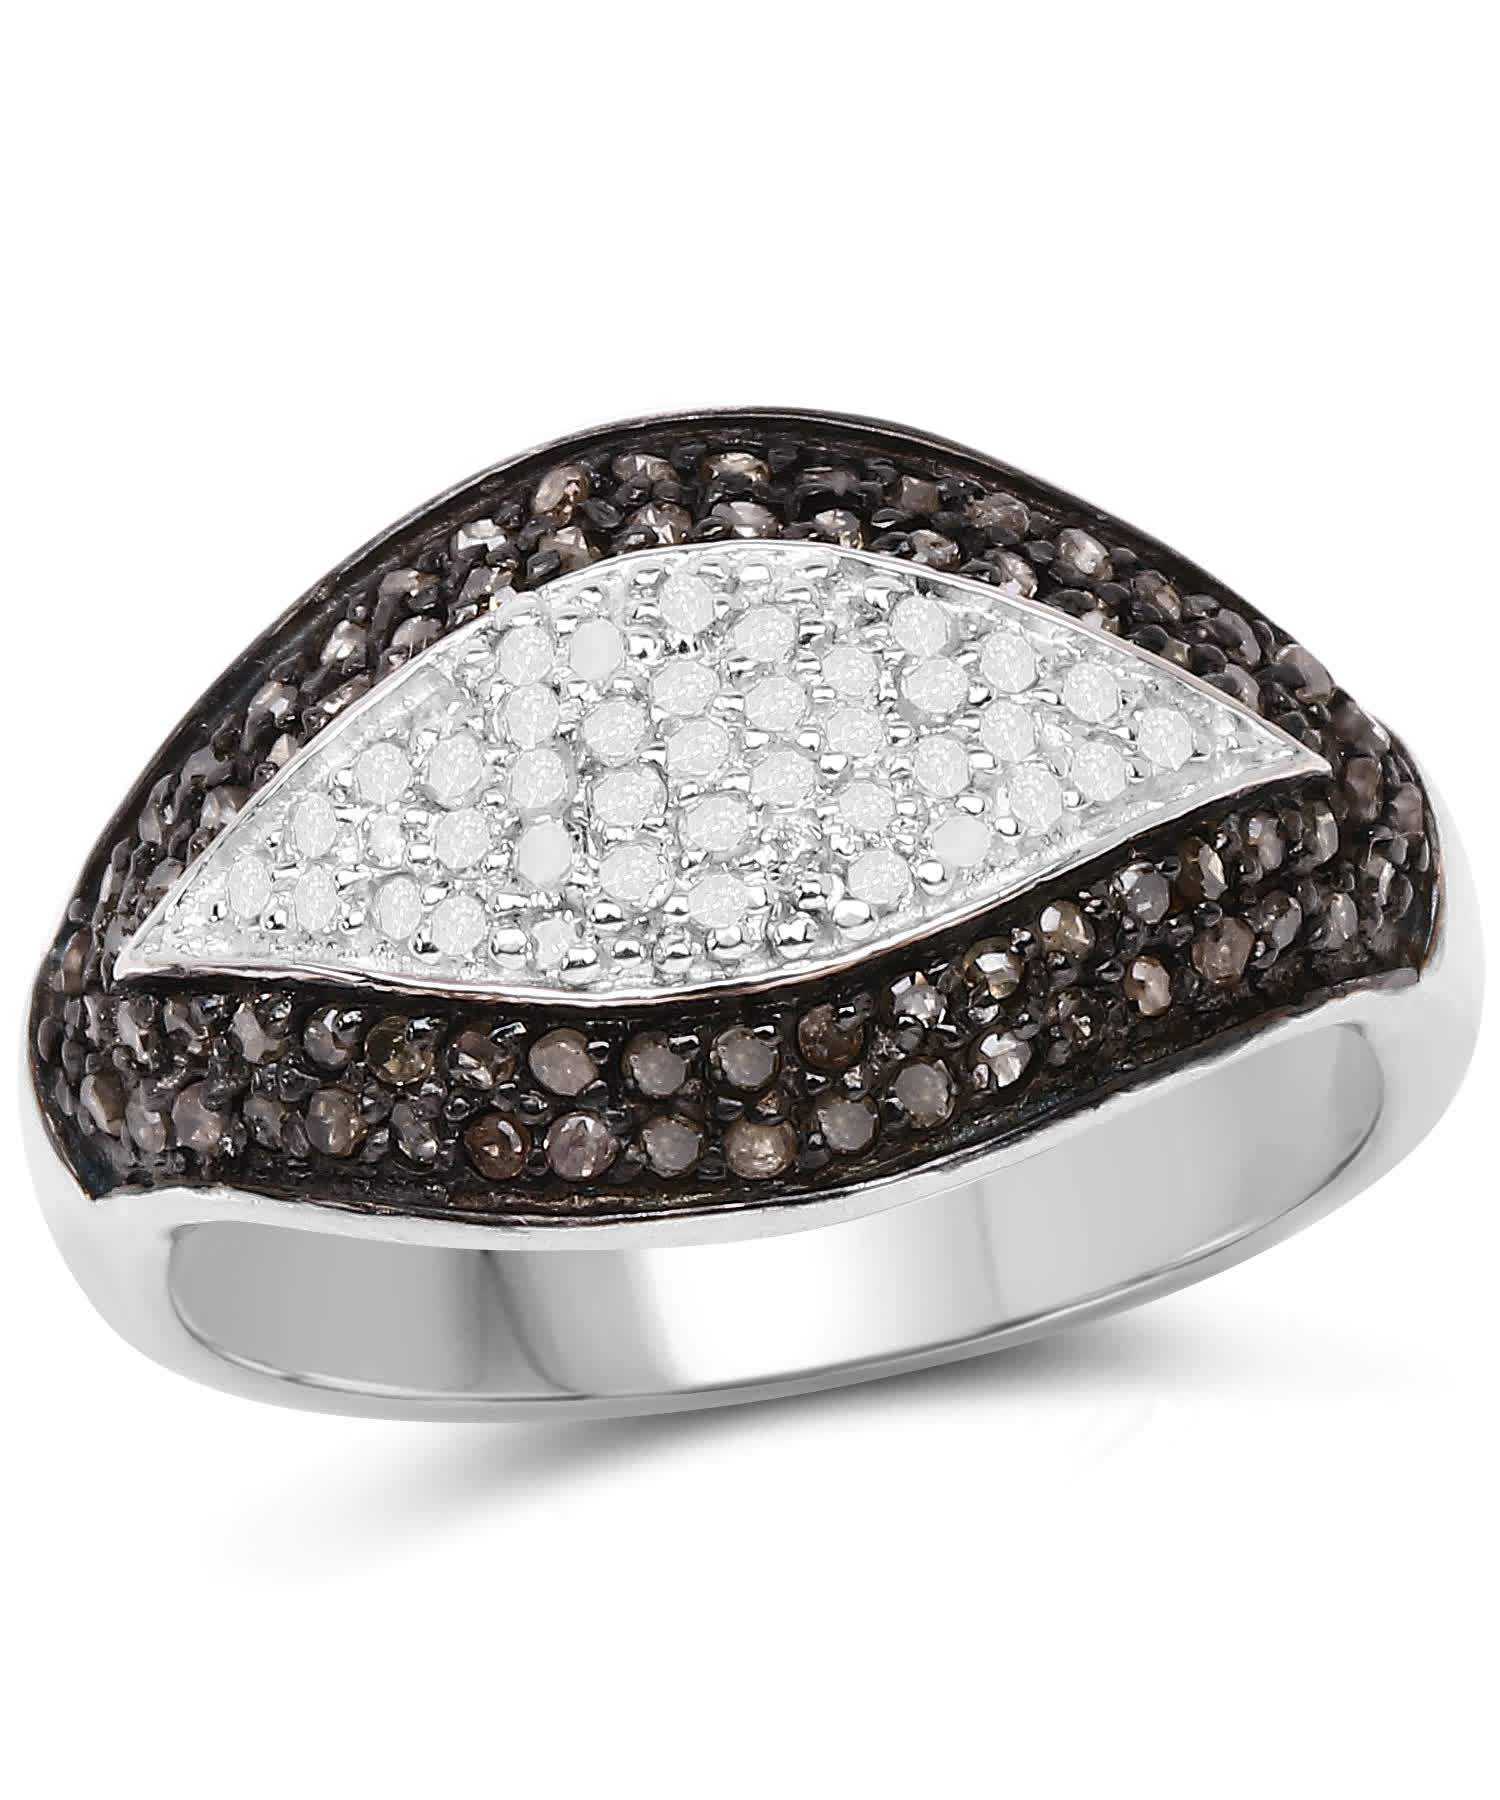 0.50ctw Champagne and Icy Diamond Rhodium Plated 925 Sterling Silver Fashion Ring View 1